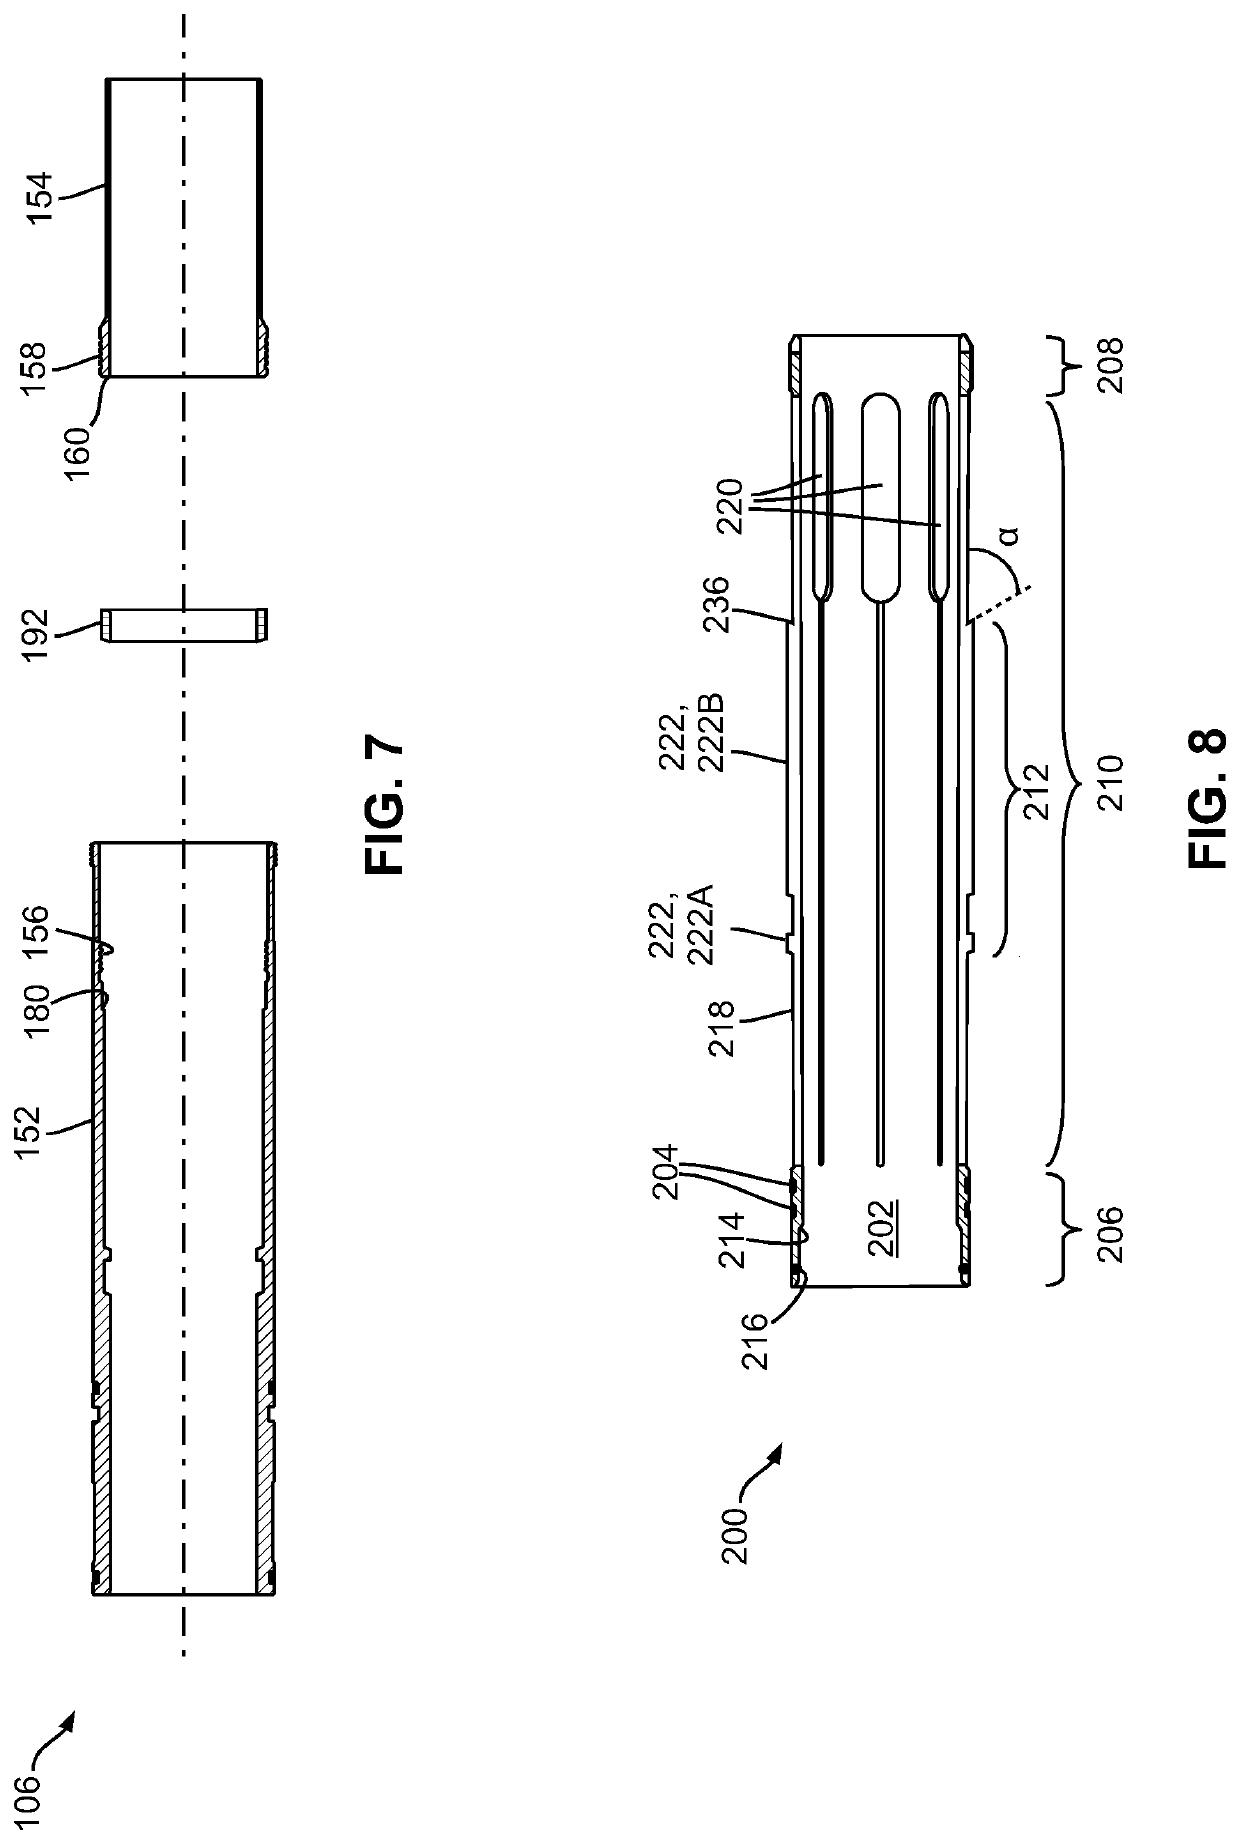 Collet with ball-actuated expandable seal and/or pressure augmented radially expandable splines